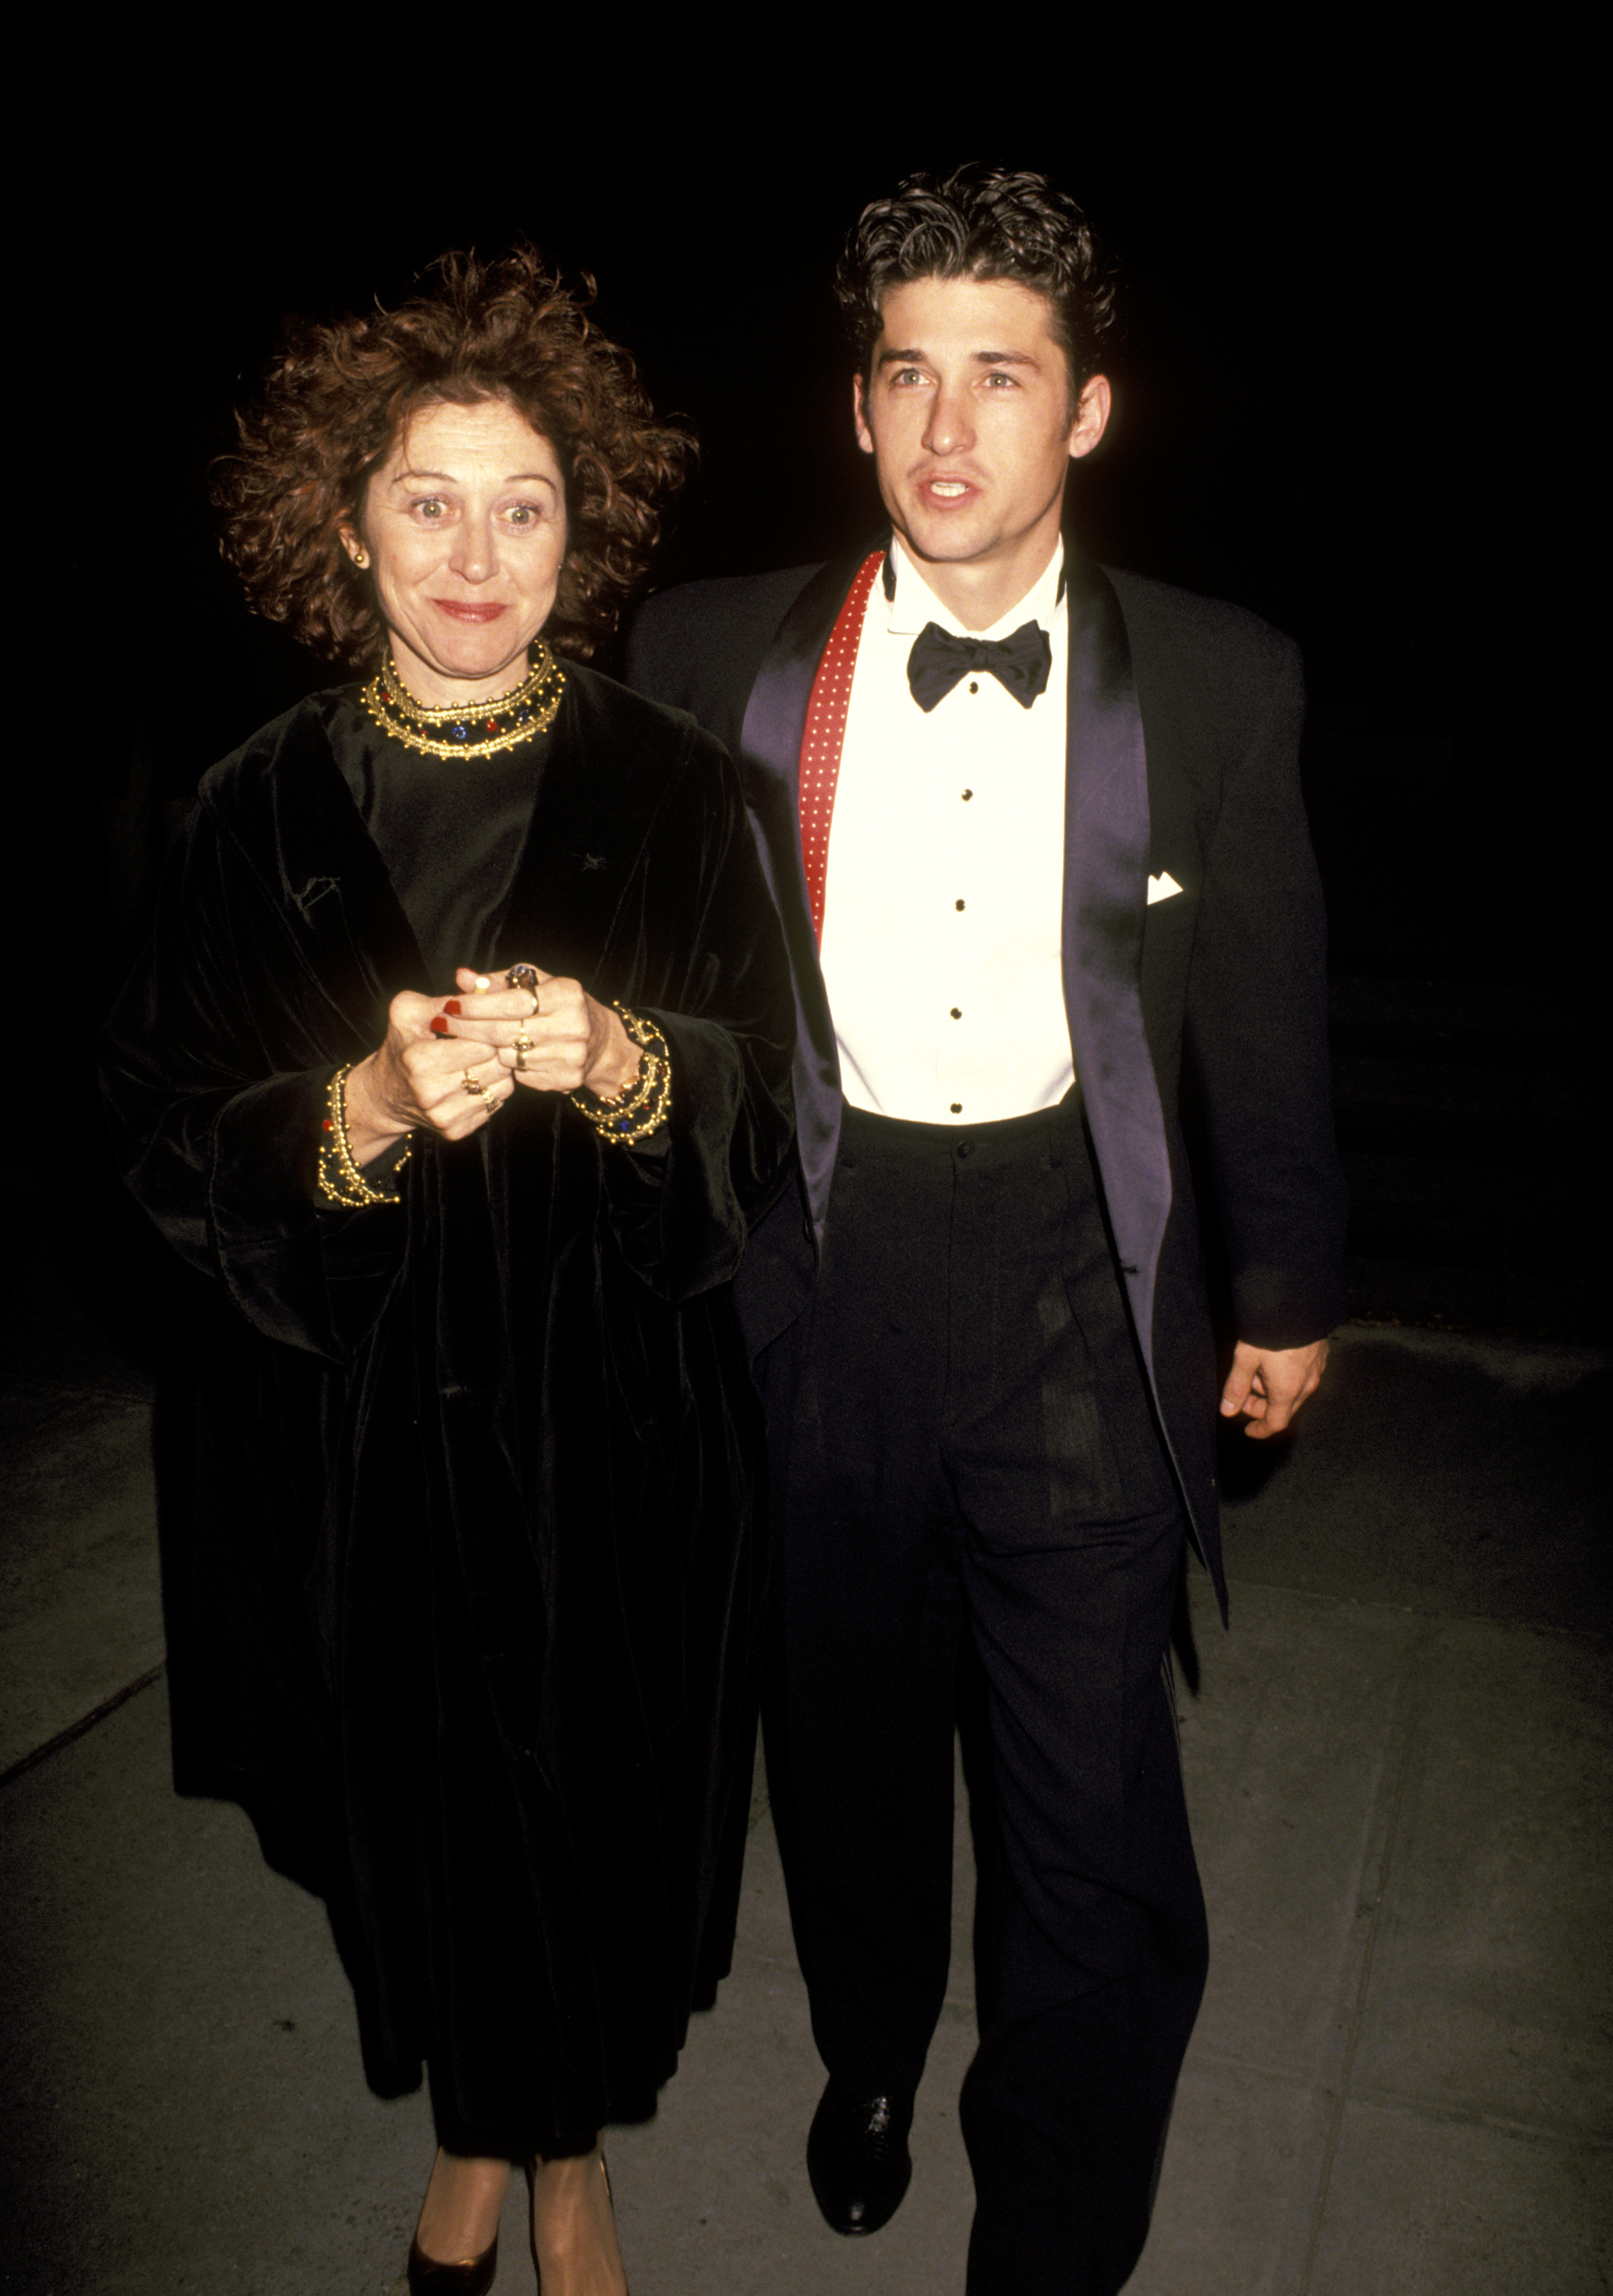 Rocky Parker and Patrick Dempsey attend the New York premiere of "Cape Fear" on October 6, 1991 in New York City | Source: Getty Images